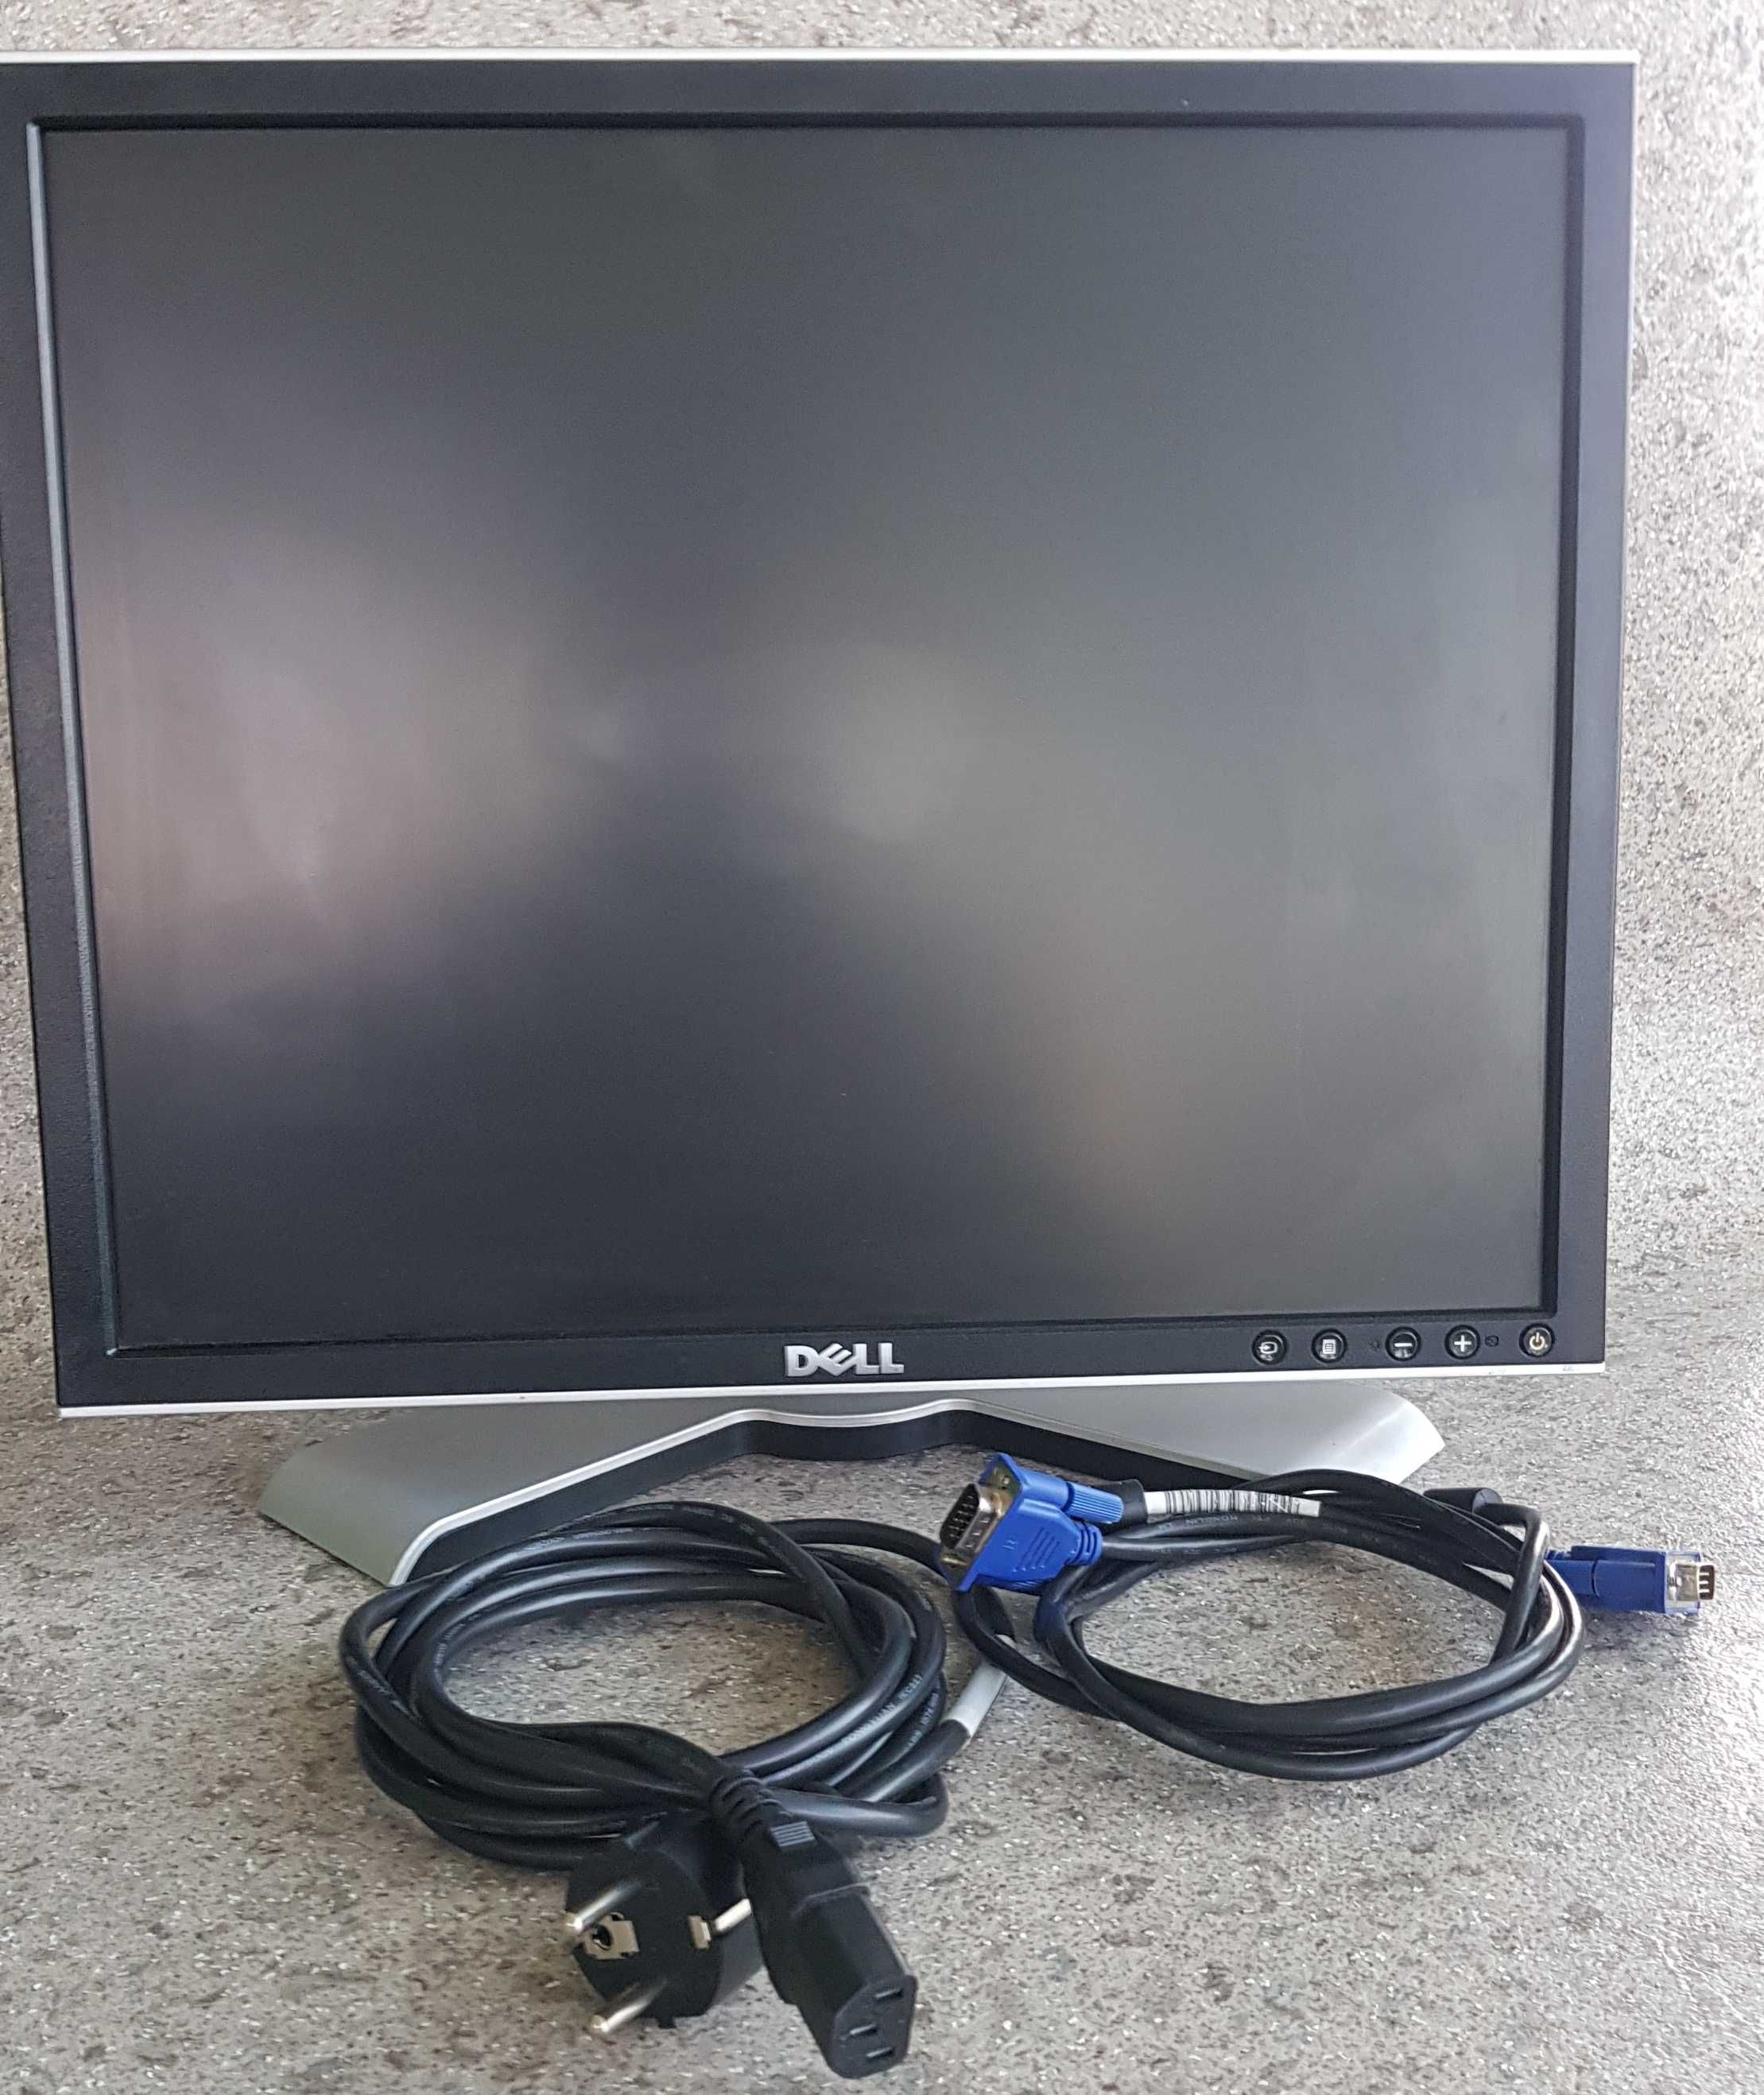 Monitor Dell 19 inci folosit in stare perfect functional! 2buc=100RON